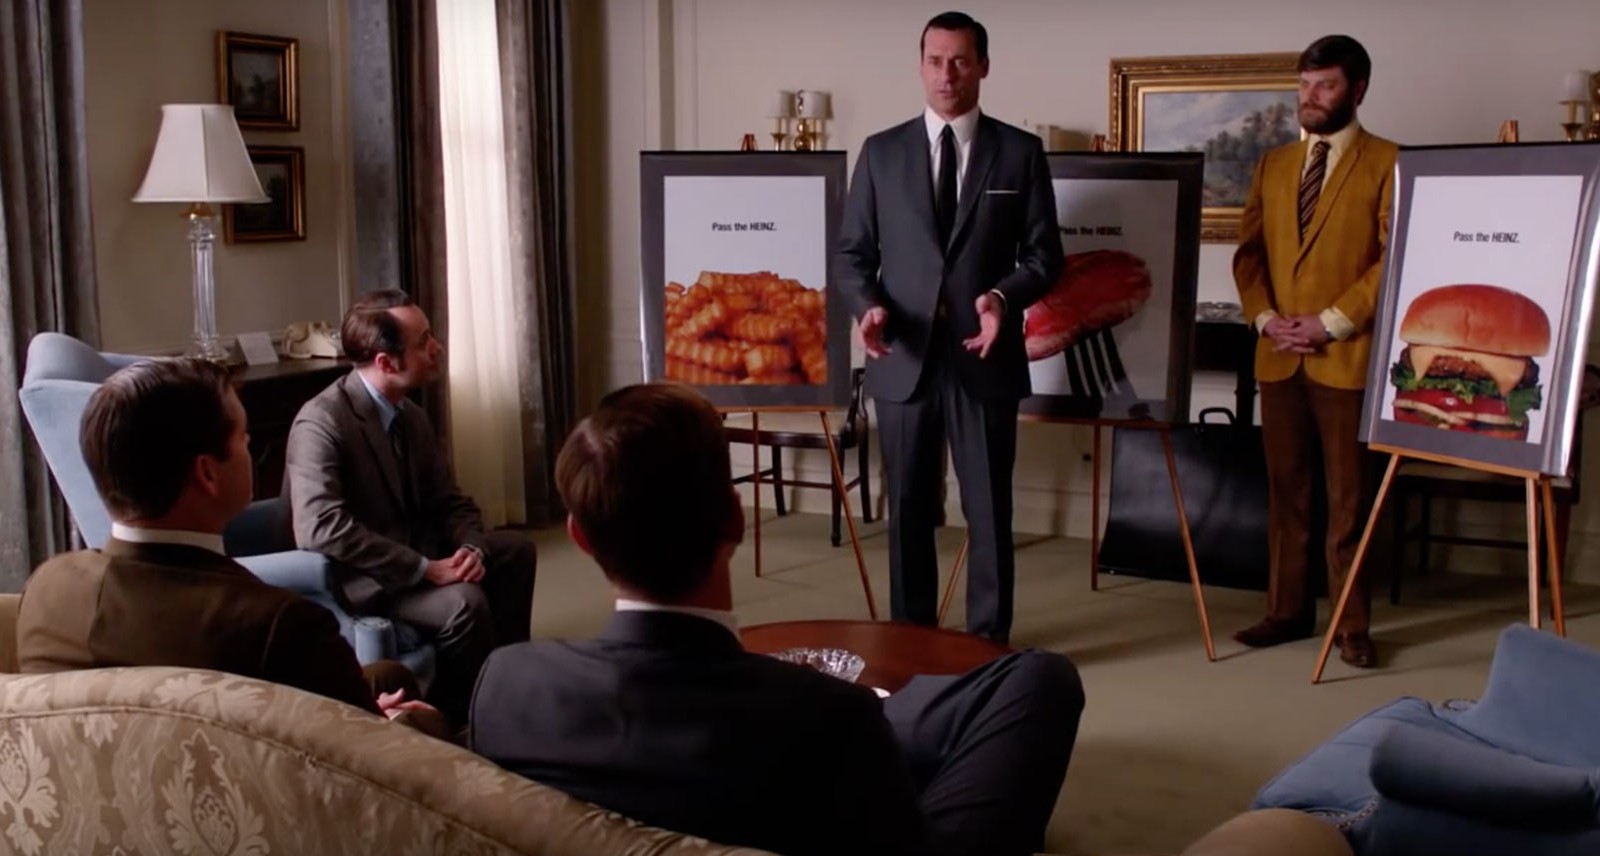 Heinz Is Running Ads That Don Draper Created on ‘Mad Men’ in Real Life